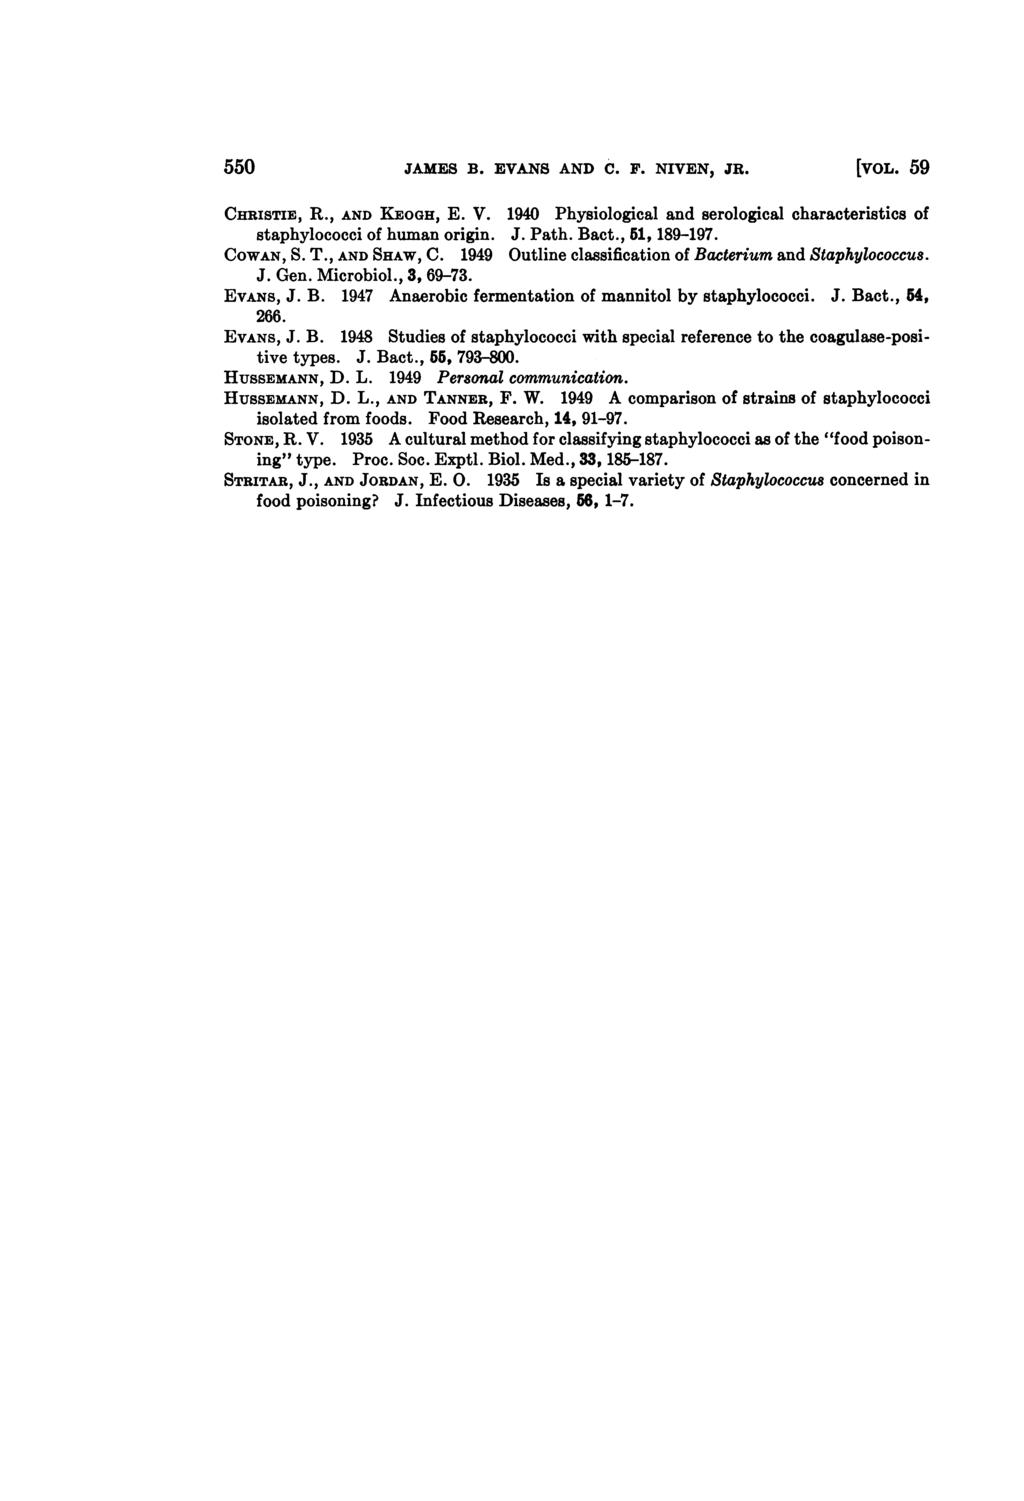 550 JAMES B. EVANS AND C. F. NIVEN, JR. [VOL. 59 CHRISTIE, R., AND KEOGH, E. V. 1940 Physiological and serological characteristics of staphylococci of human origin. J. Path. Bact., 51, 189-197.